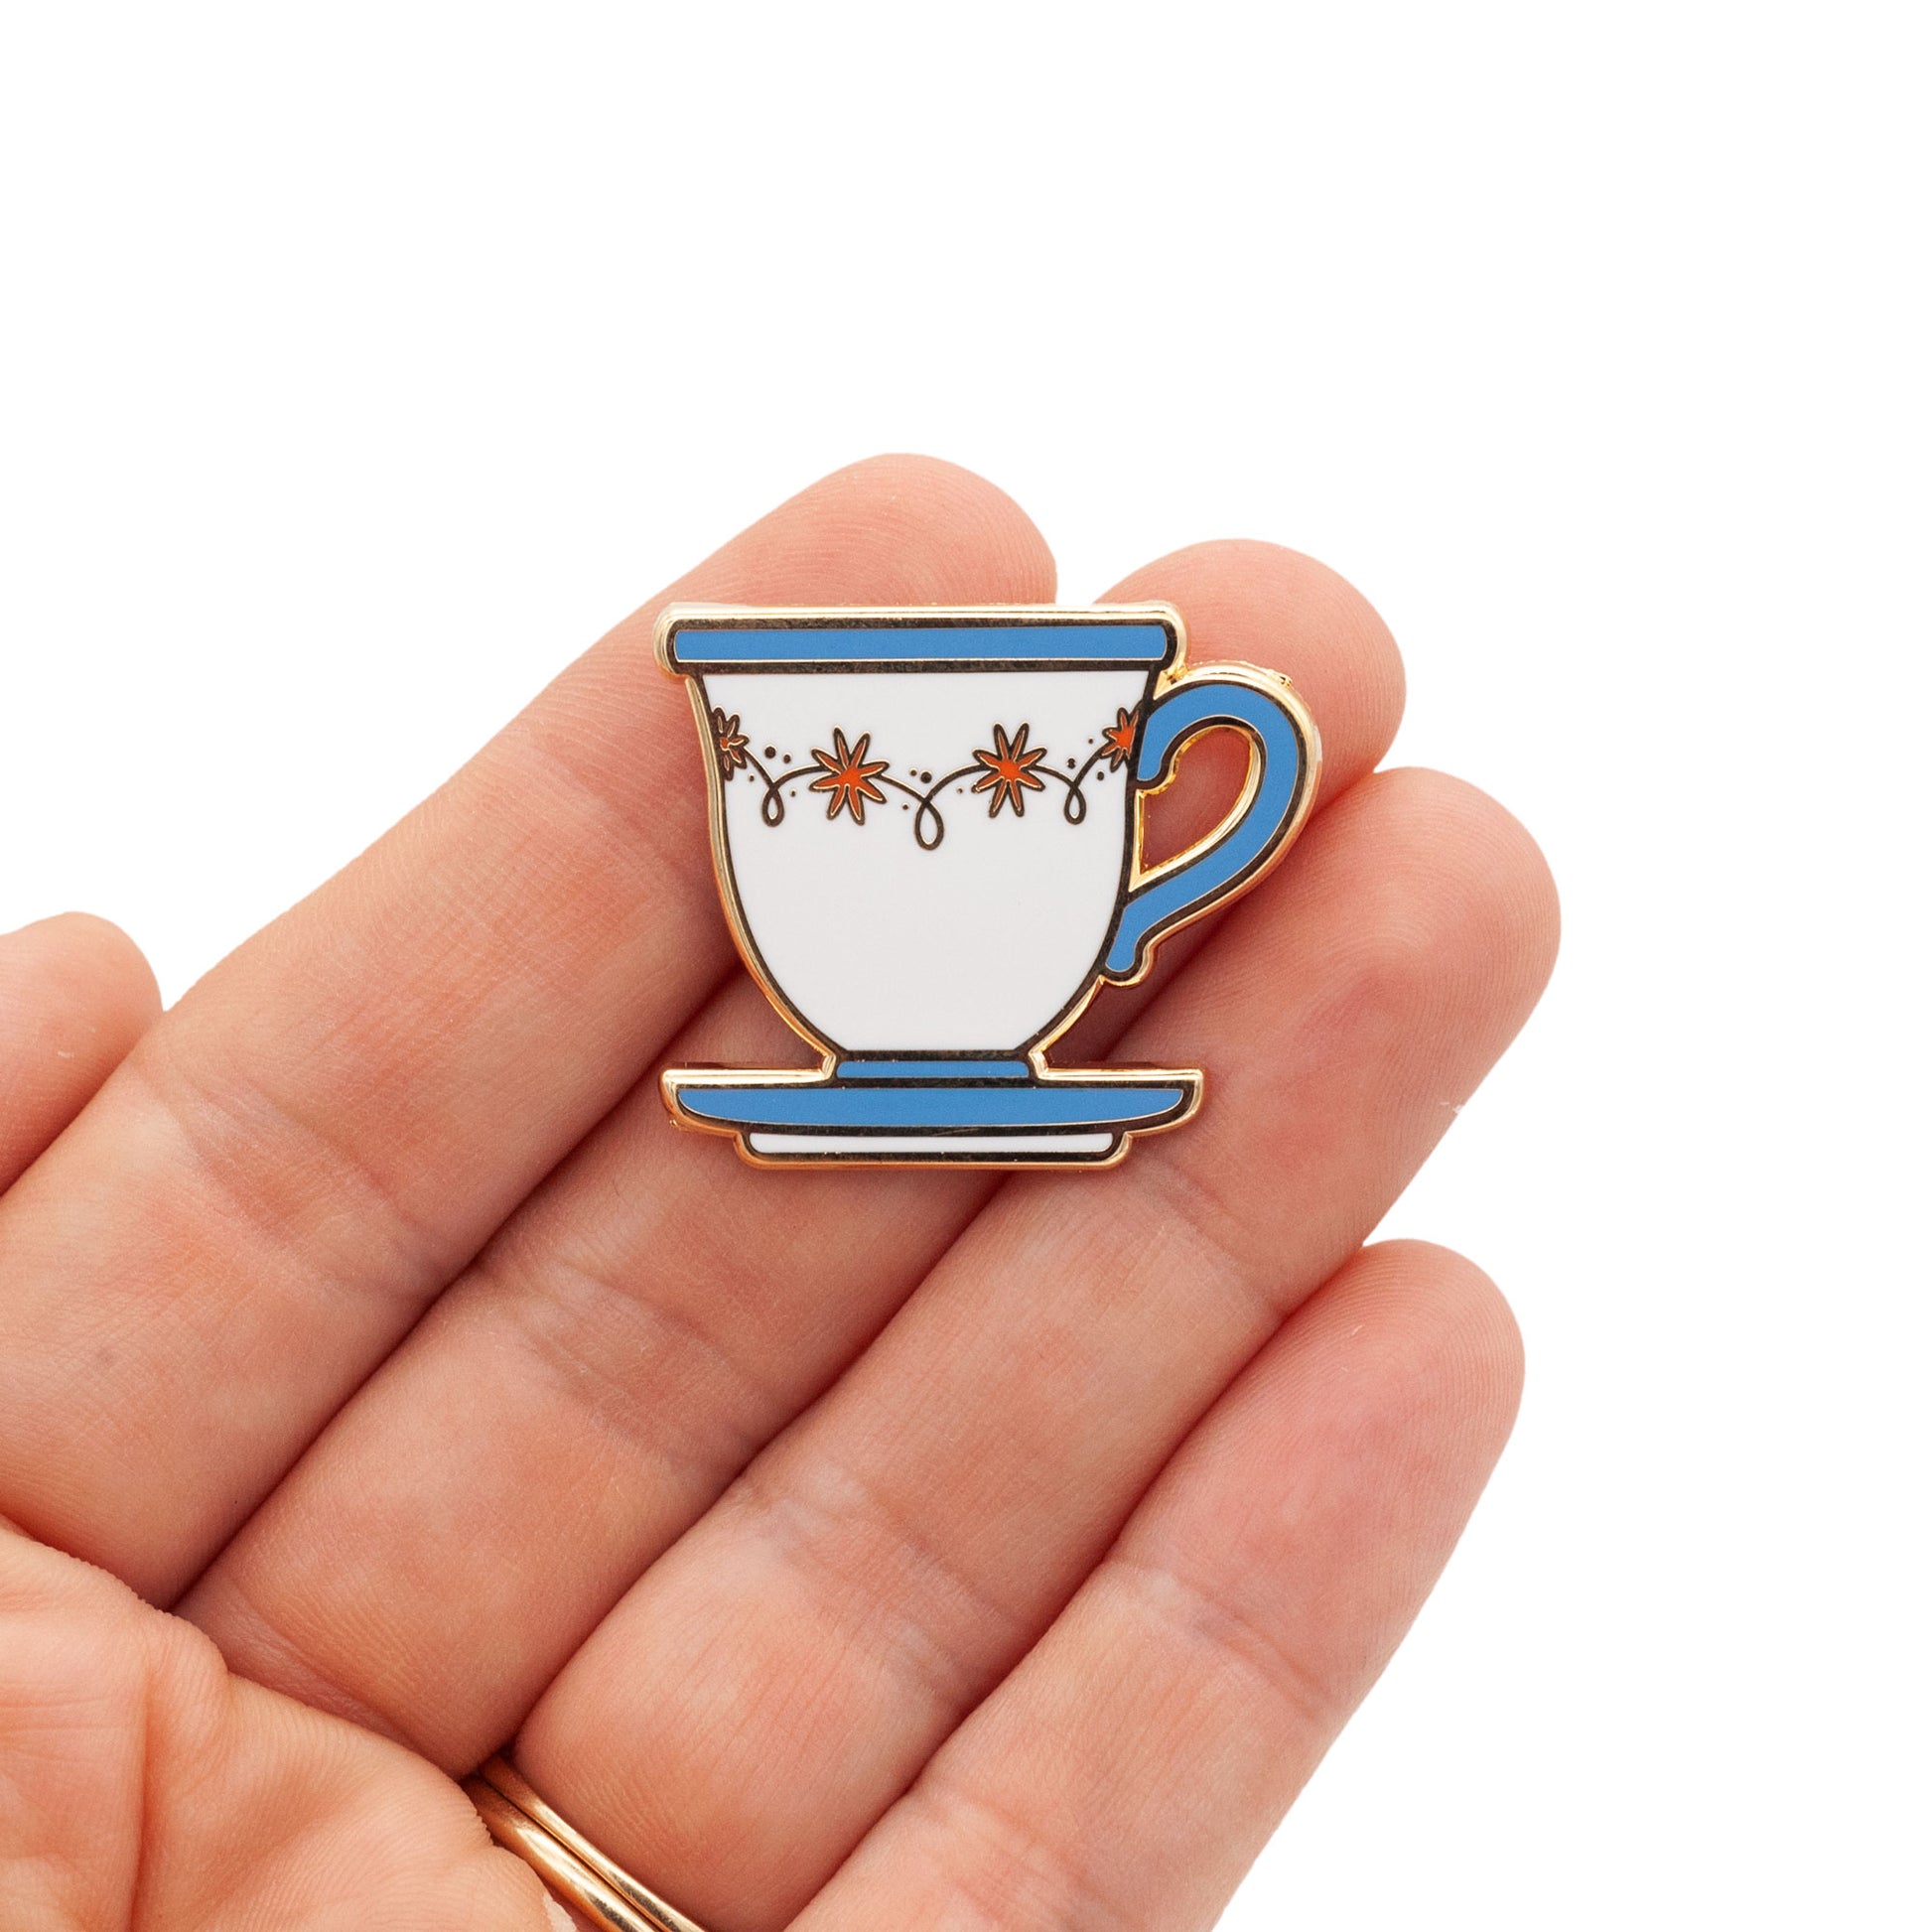 An illustrated teacup in pin form. The teacup has a handle on its right side that is blue. Colors being used are blue, red and white. gold plated and hard enamel. the pin is being held by a hand against a white background.